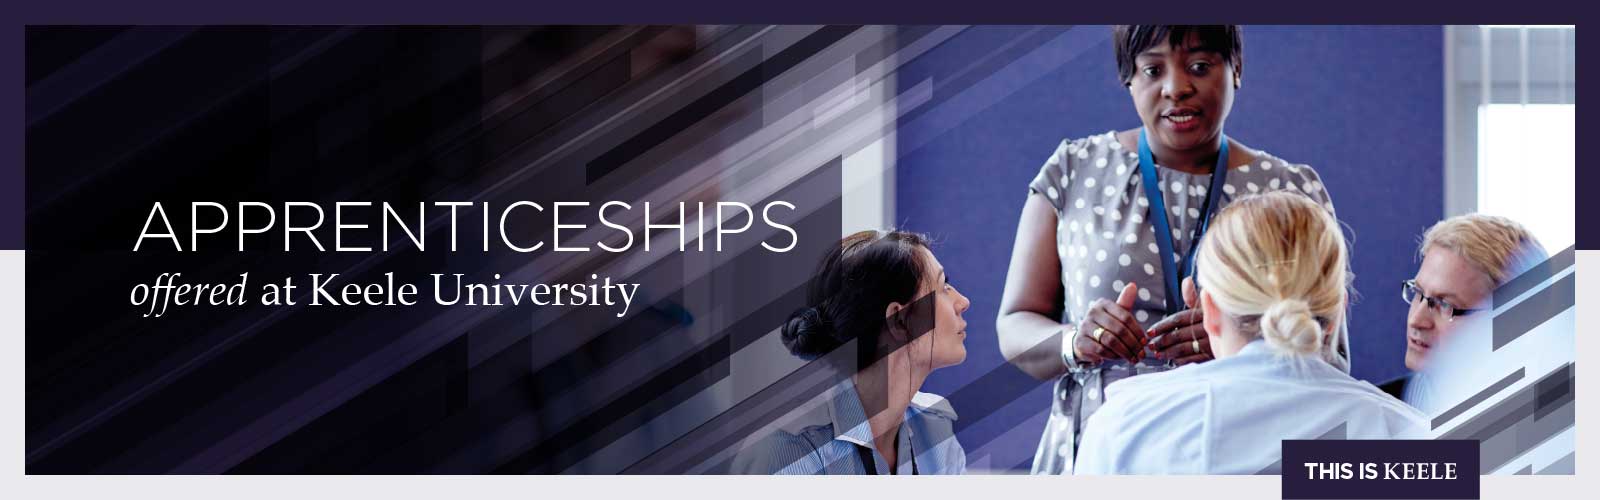 Apprenticeships offered at Keele University